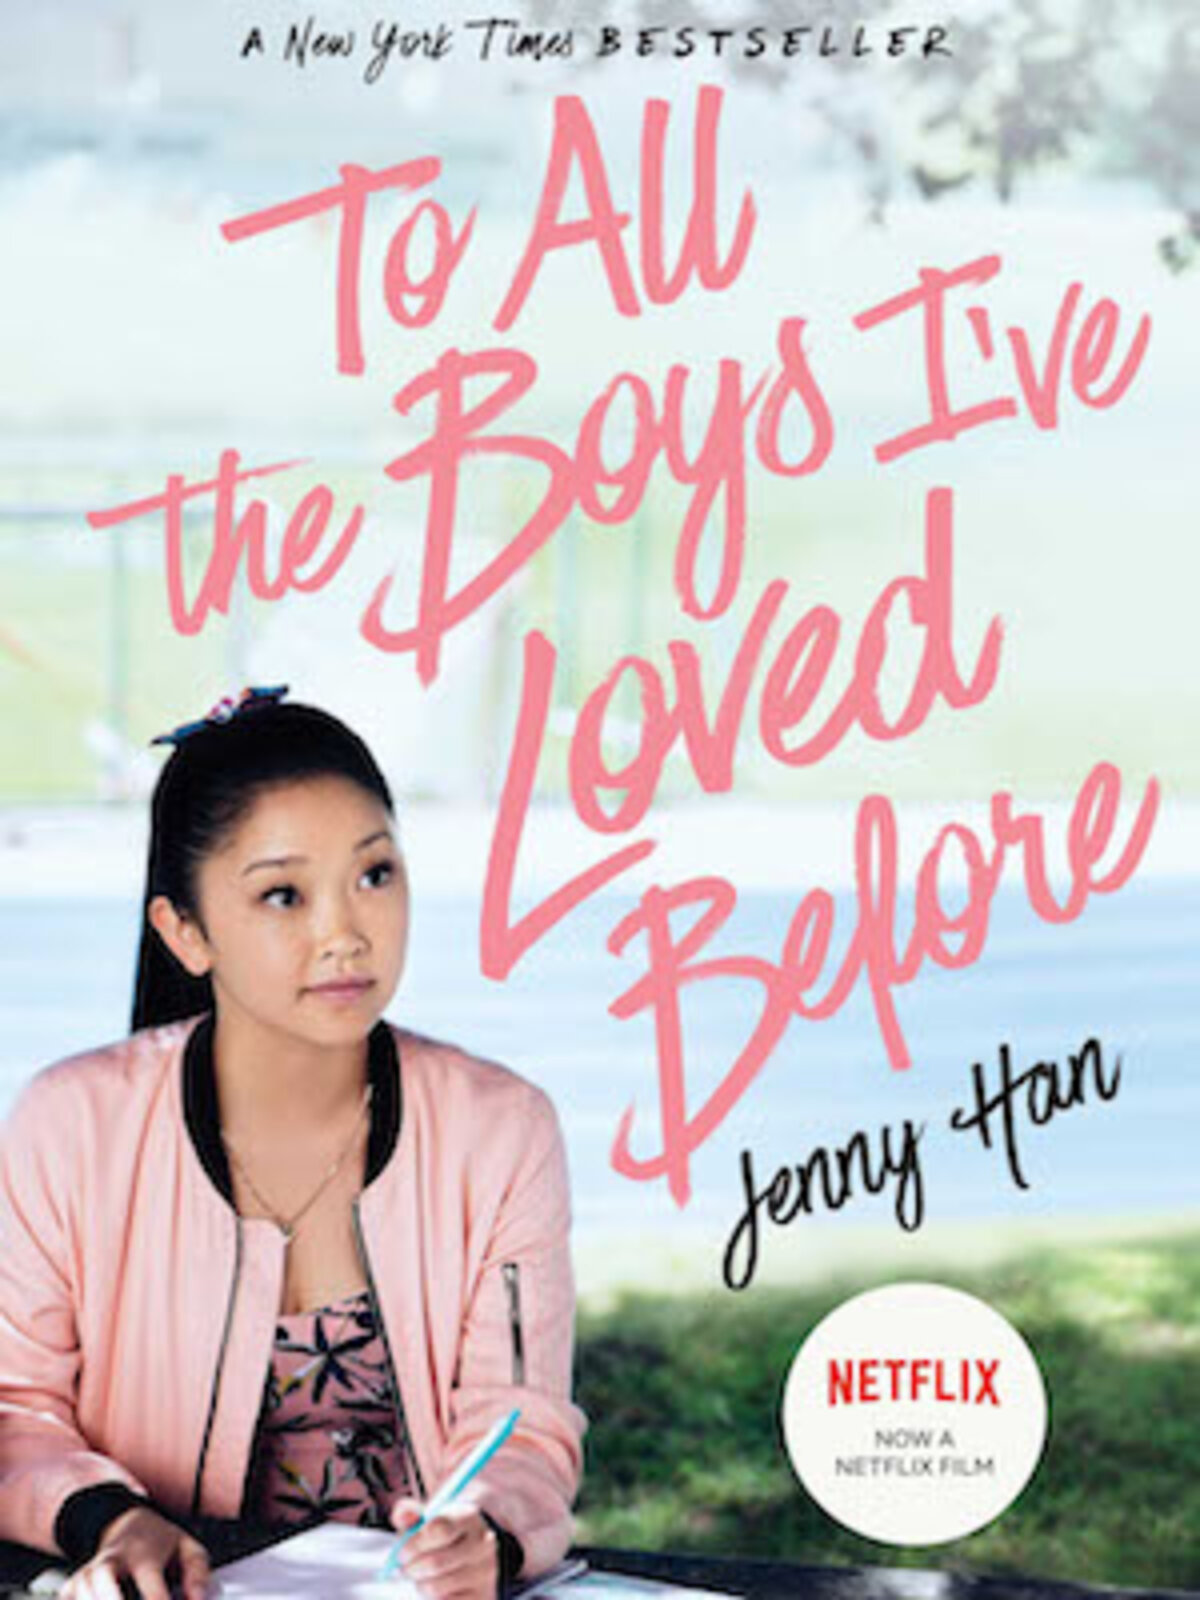 A teenage girl in a pink jacket sitting outside for To All The Boys I've Loved Before movie poster